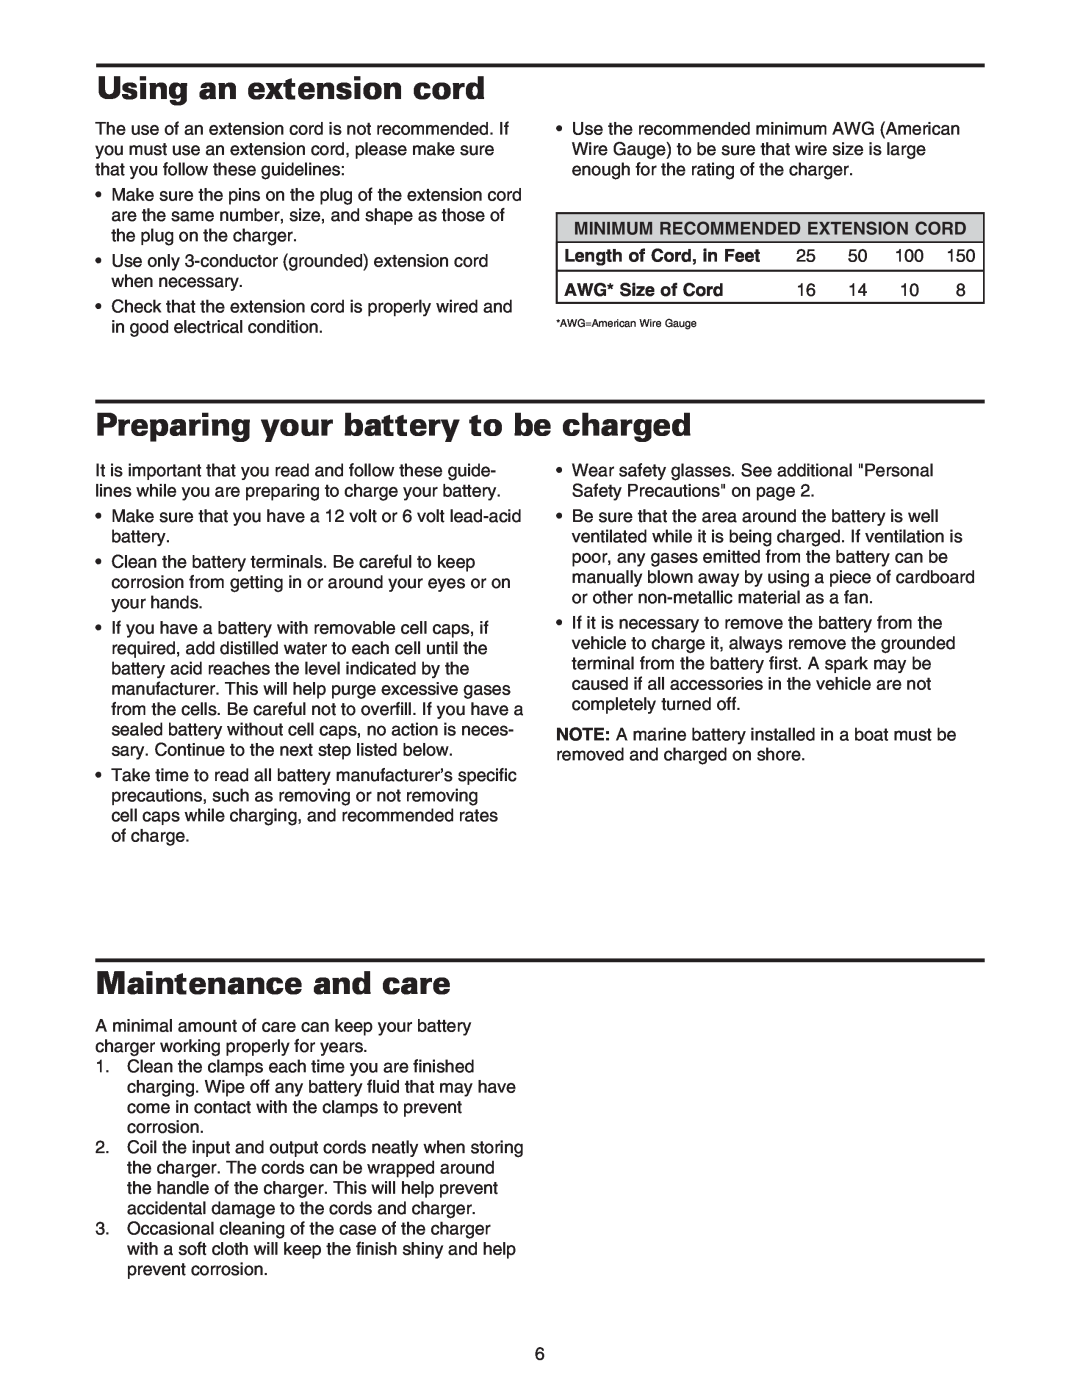 Sears 200.71233 Using an extension cord, Preparing your battery to be charged, Maintenance and care, AWG* Size of Cord 